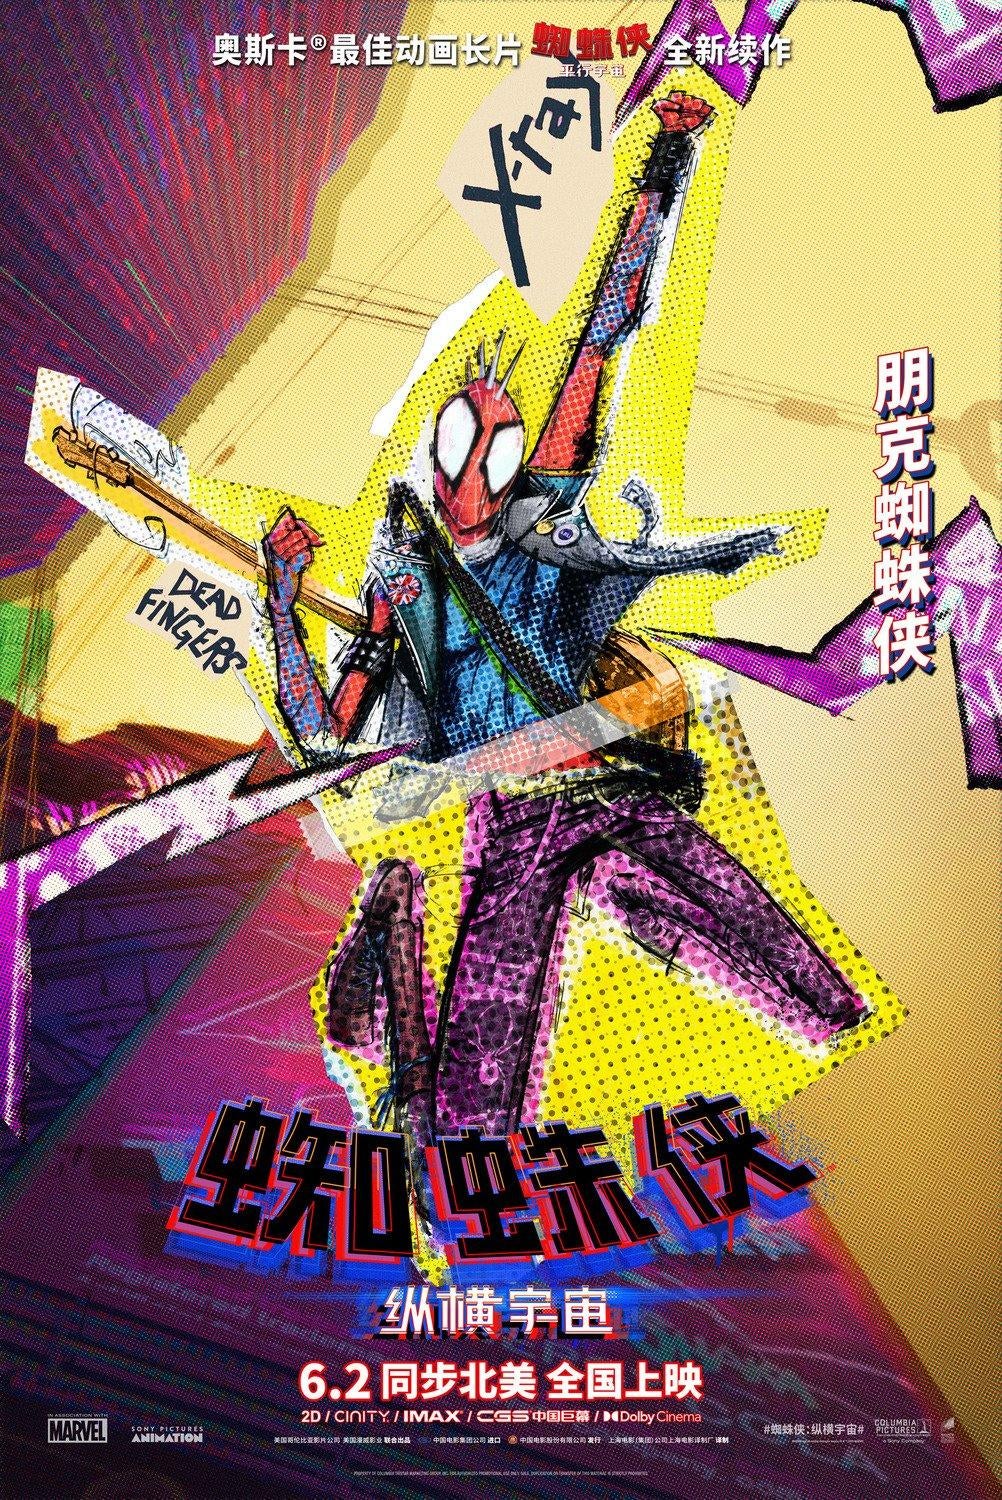 Spider-Man: Into the Spider-Verse Character Posters Released